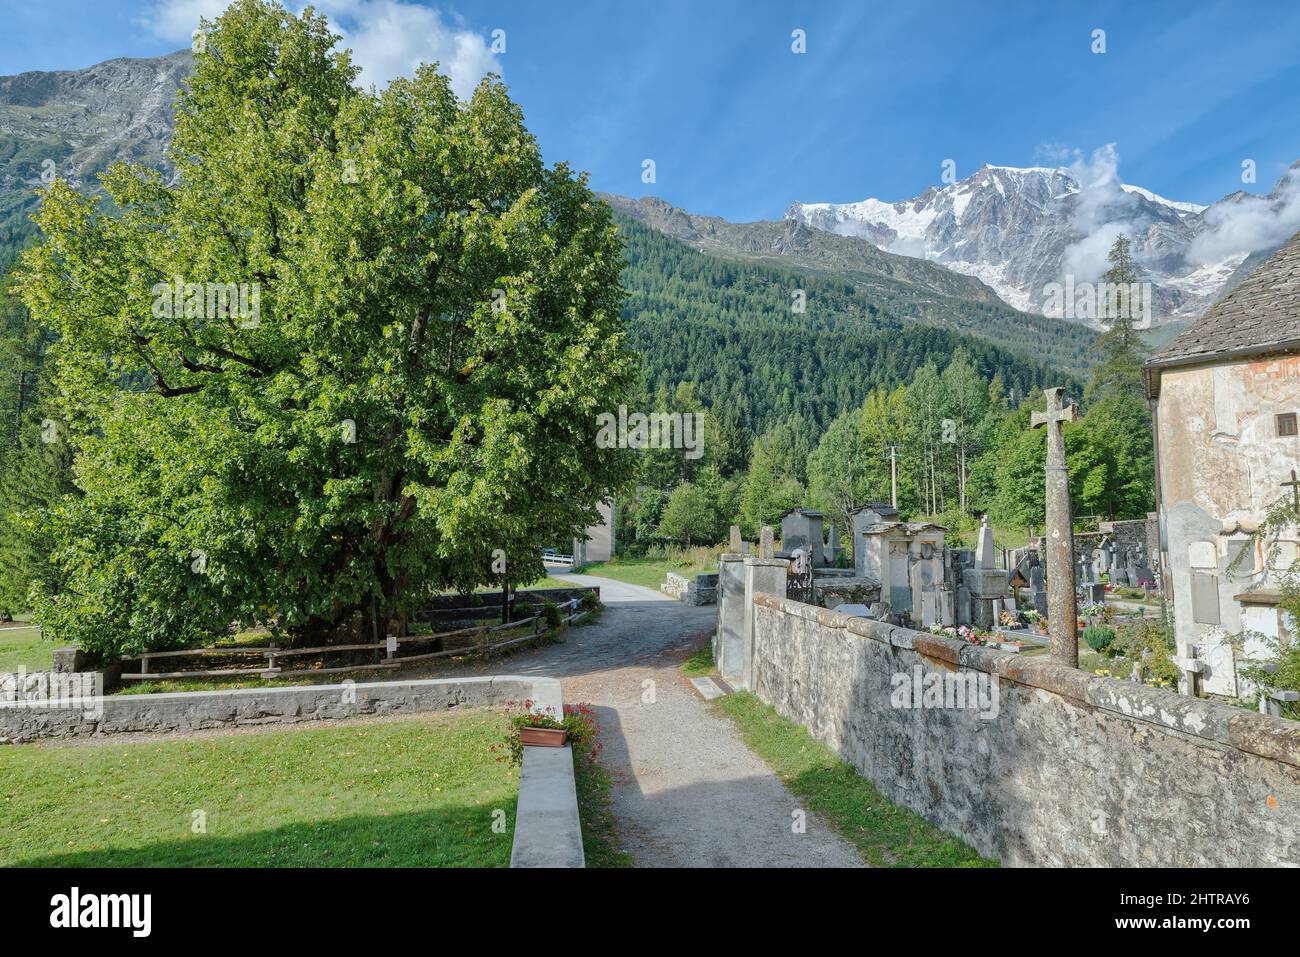 Summer scenery of the Alps. Macugnaga, important tourist resort, Italy. Mountain landscape with Monte Rosa Stock Photo